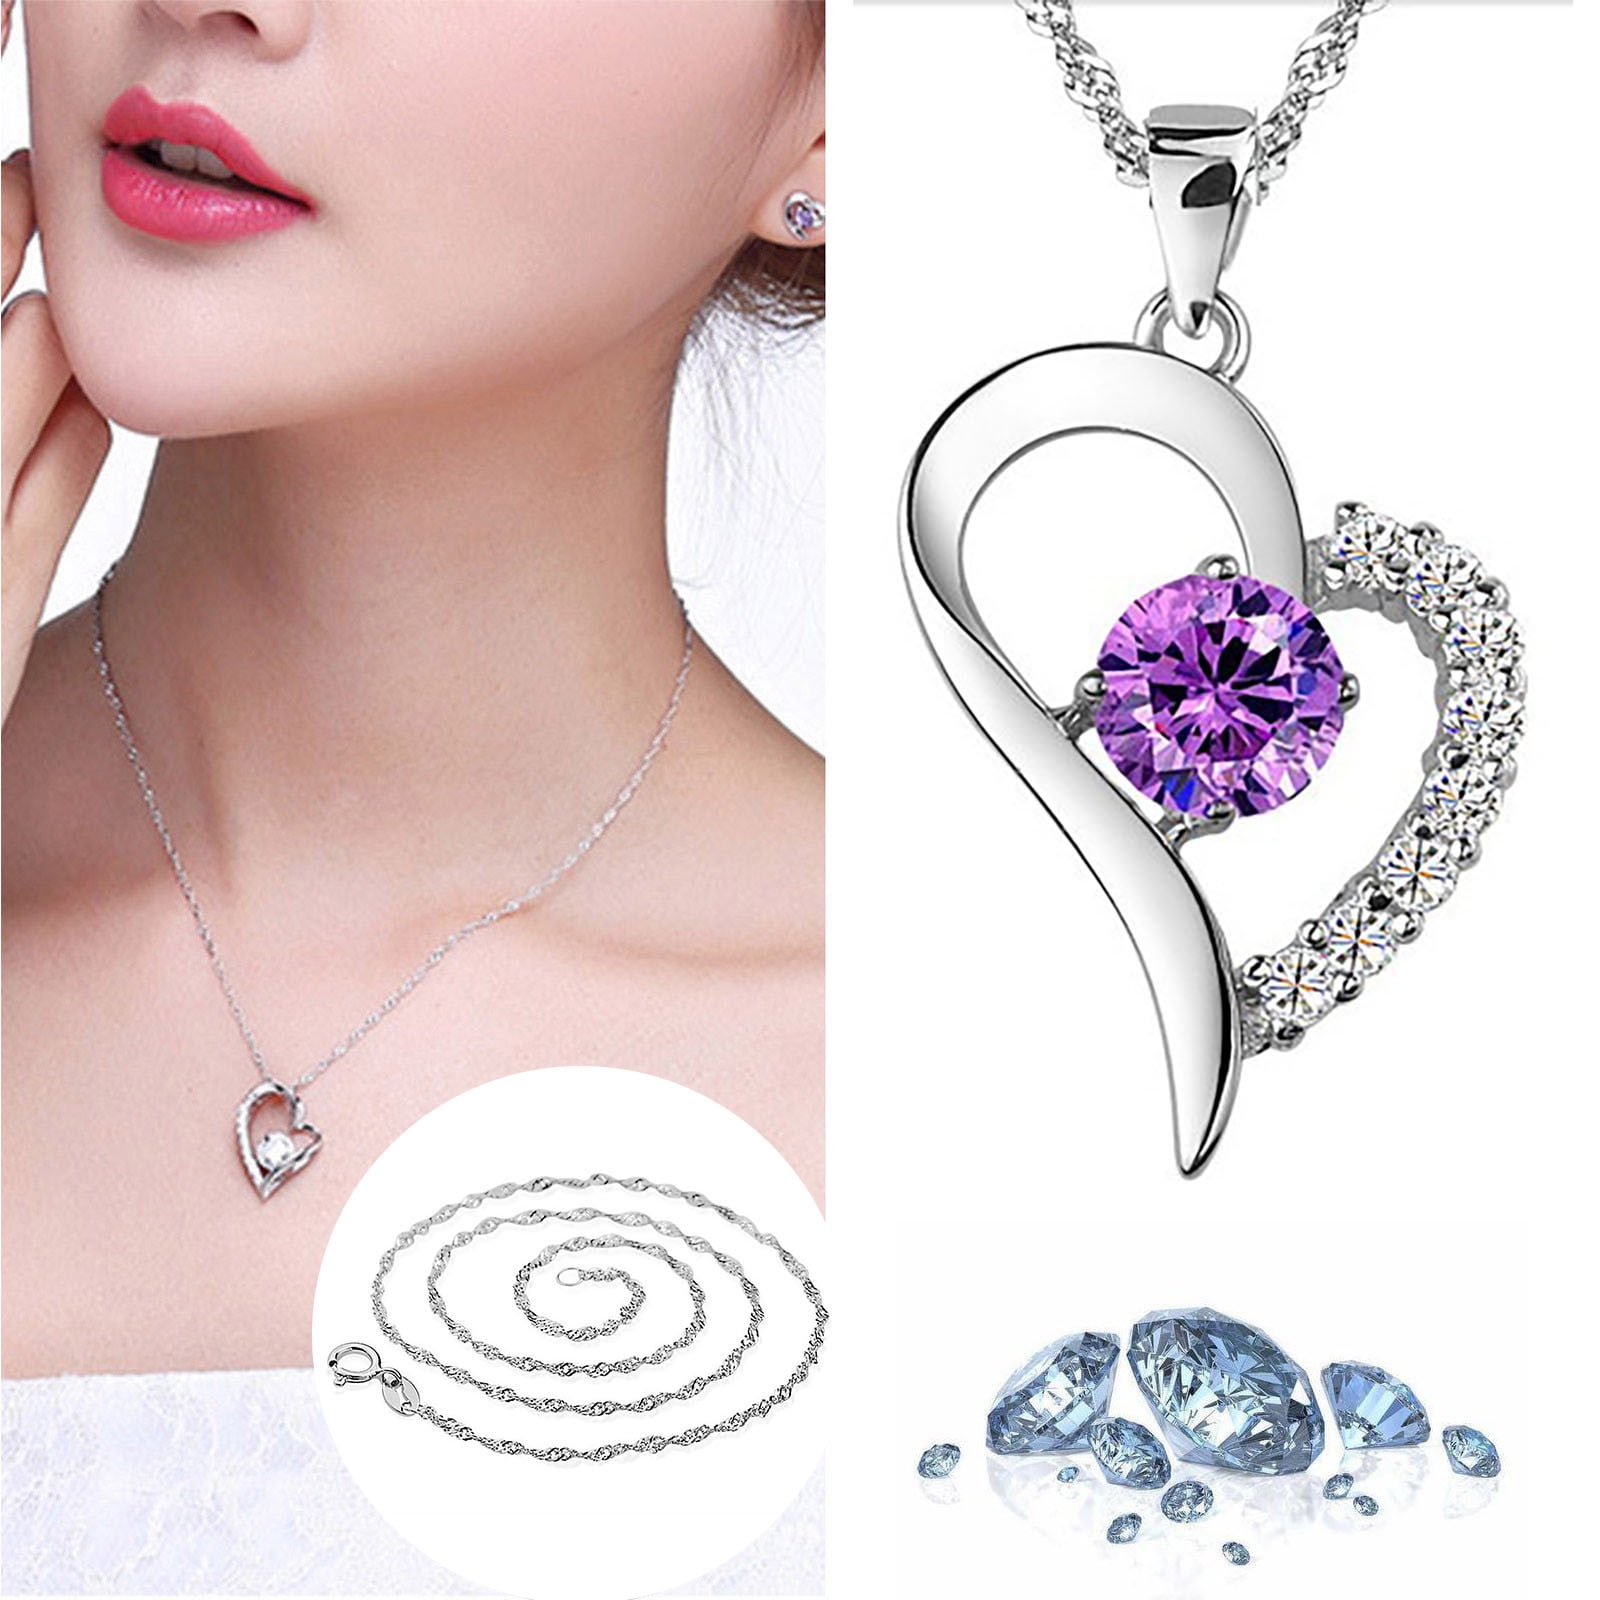 Fashion Girl Womens Gemstone Chain Crystal Heart Necklace Pendant Jewelry Gift